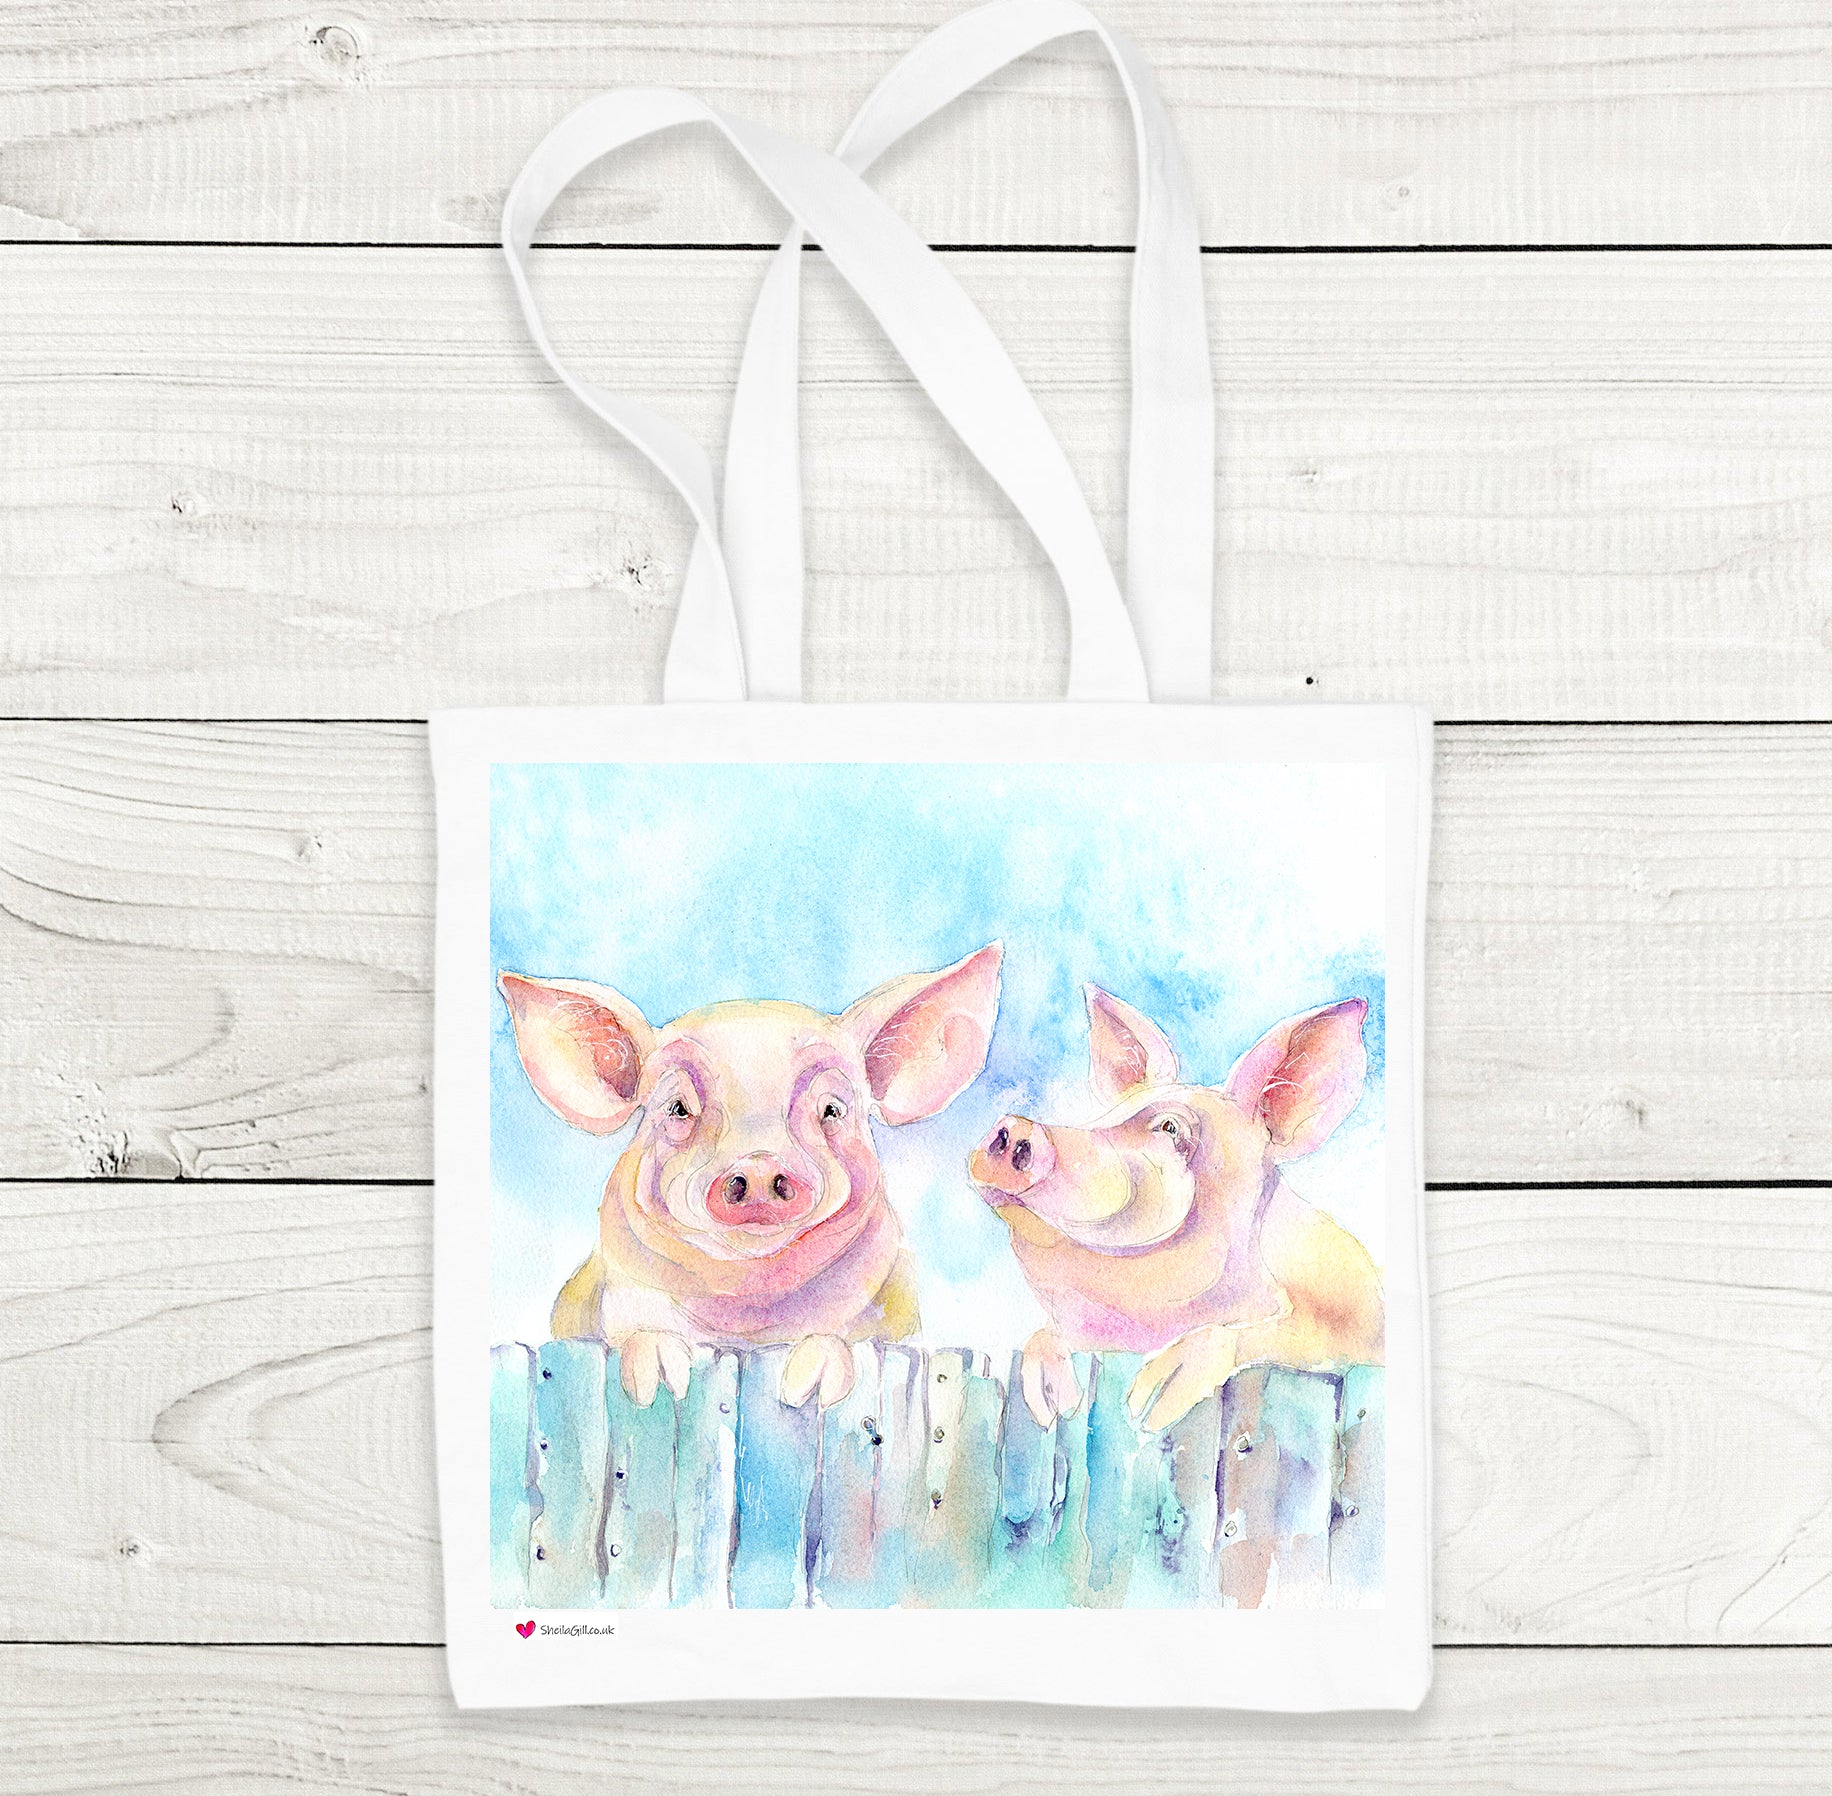 Two Little Piggies Printed on a WhiteTote Bag